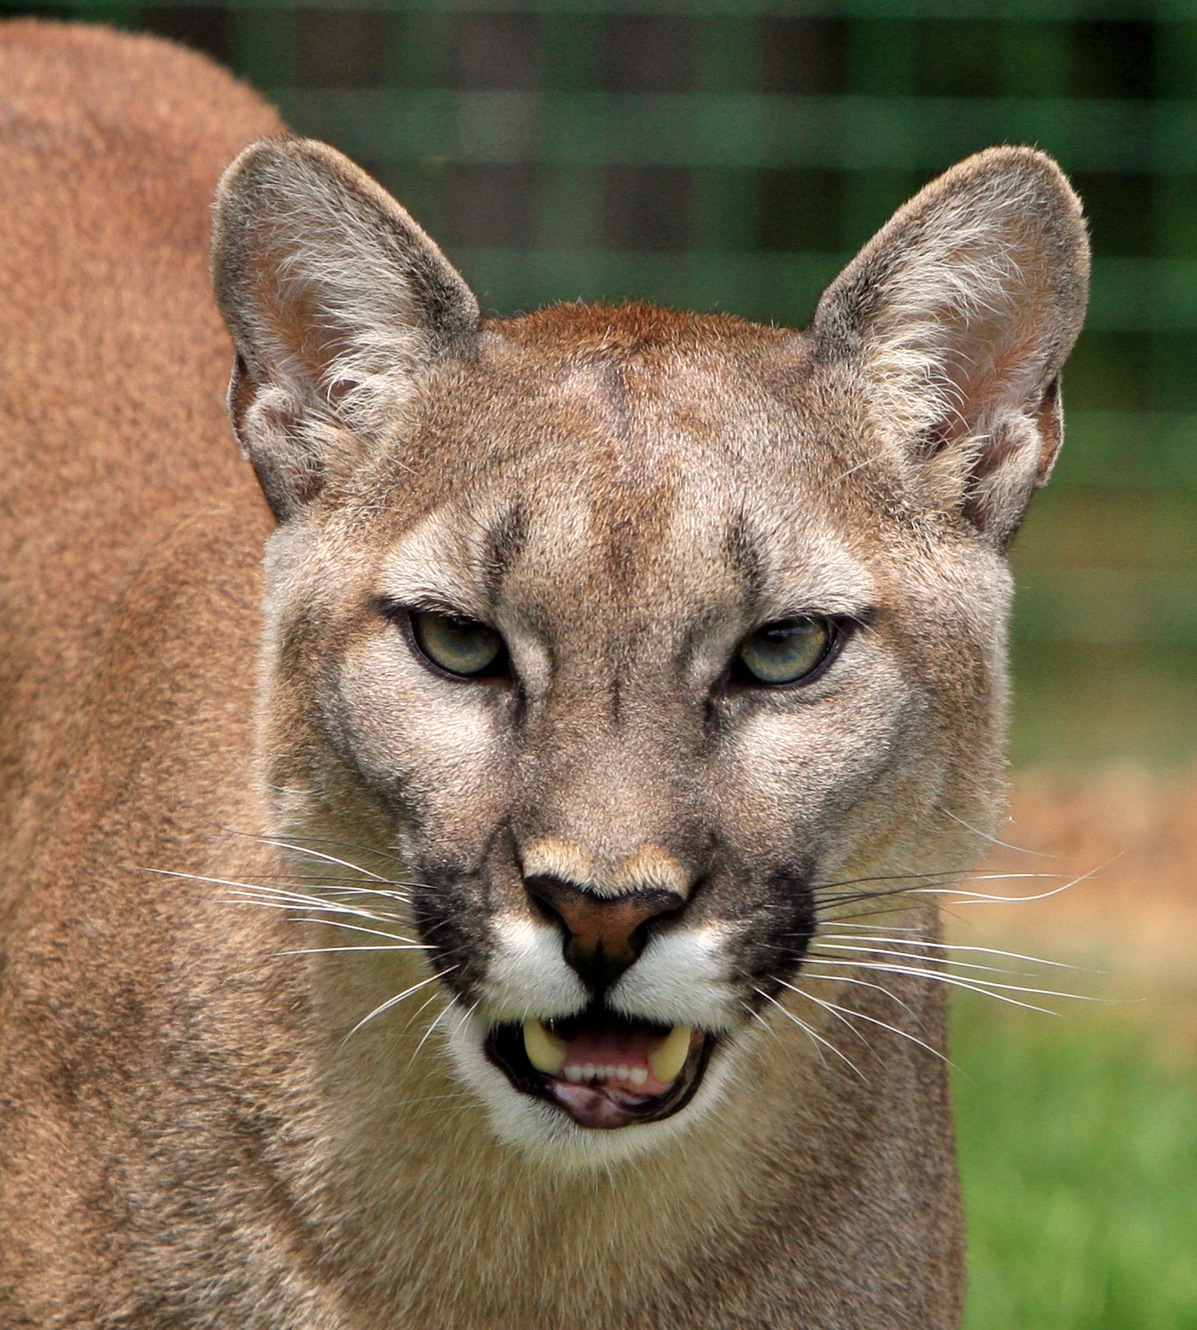 Cougars spotted repeatedly on Vashon